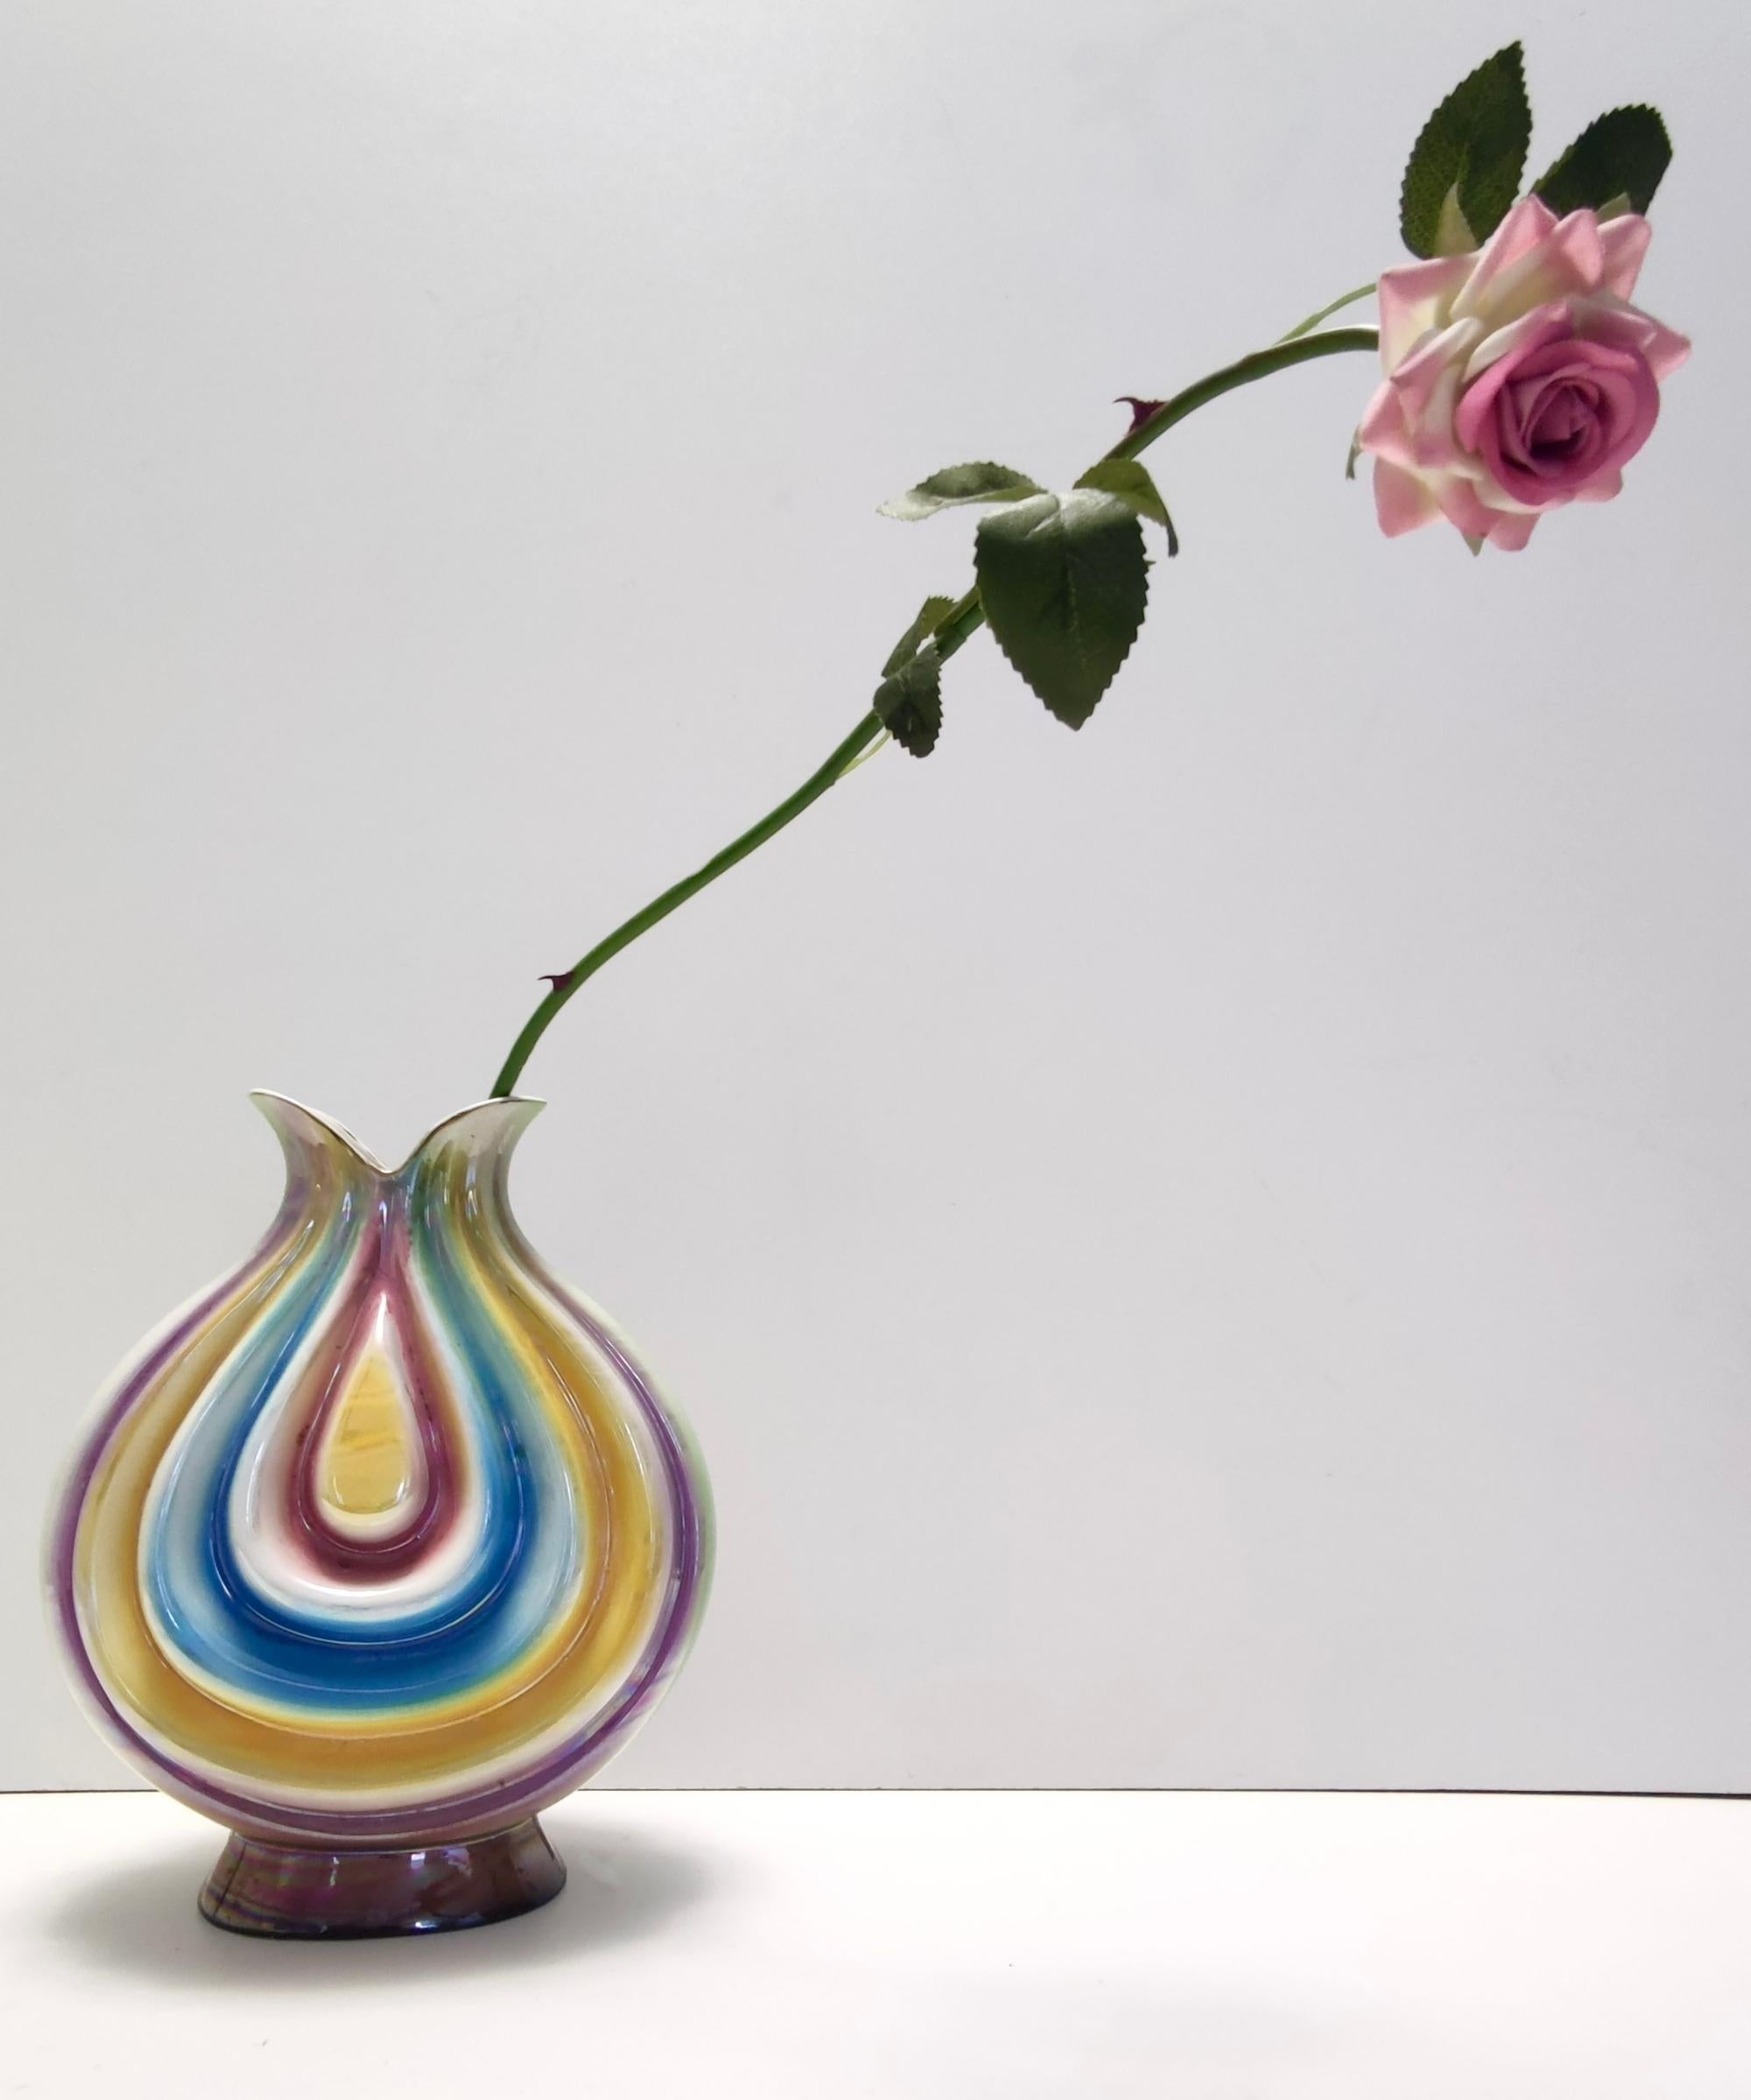 Made in Italy, Sesto Fiorentino, 1950s.
It is made in lacquered ceramic with iridescent colors.
This vase is a vintage item, therefore it might show slight traces of use, but it can be considered as in excellent original condition.

Measures: